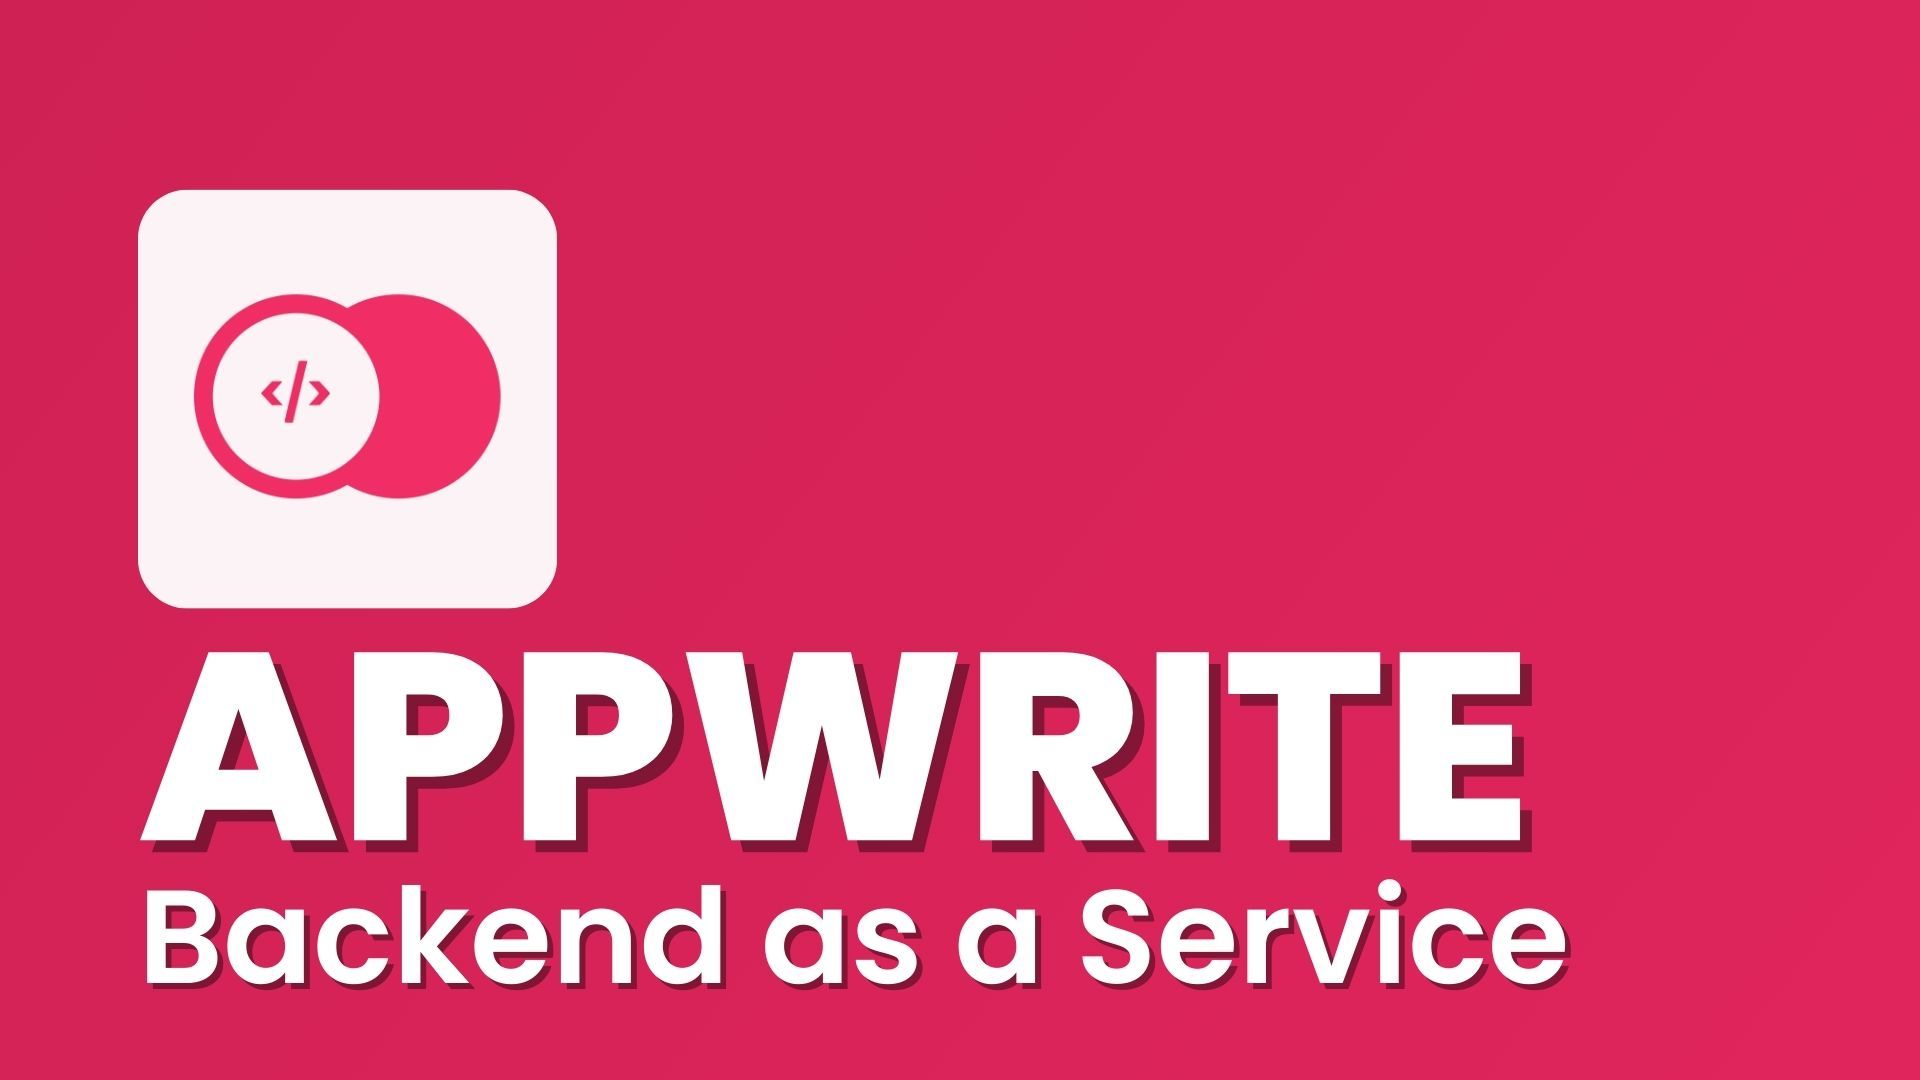 Appwrite: The Easy Way to Create a Custom Backend for Your Web or Mobile App